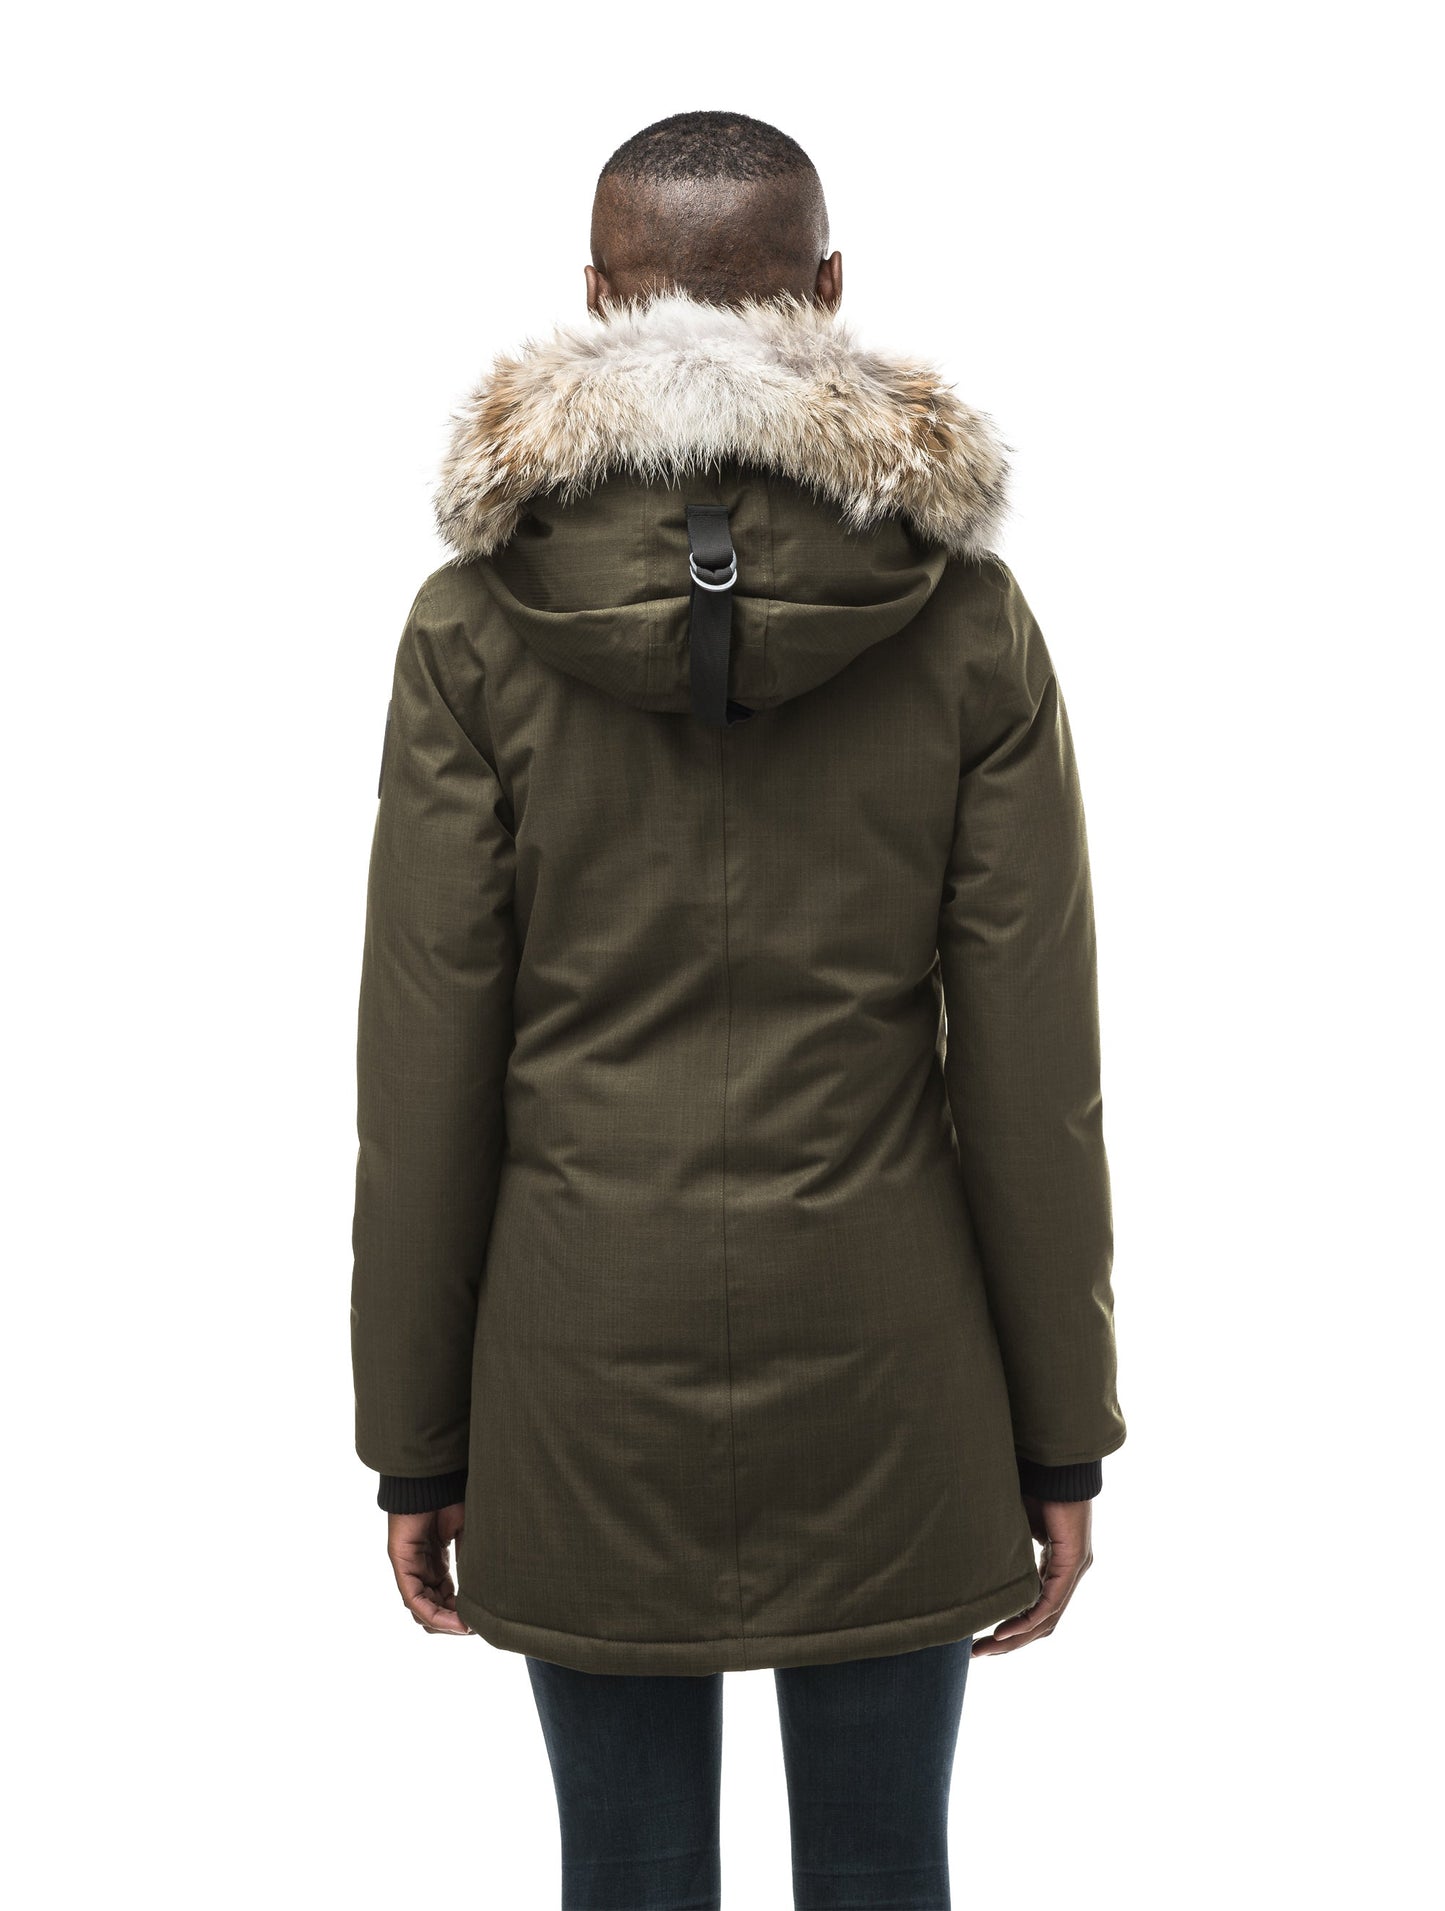 Women's down filled parka that sits just below the hip with a clean look and two hip patch pockets in CH Army Green